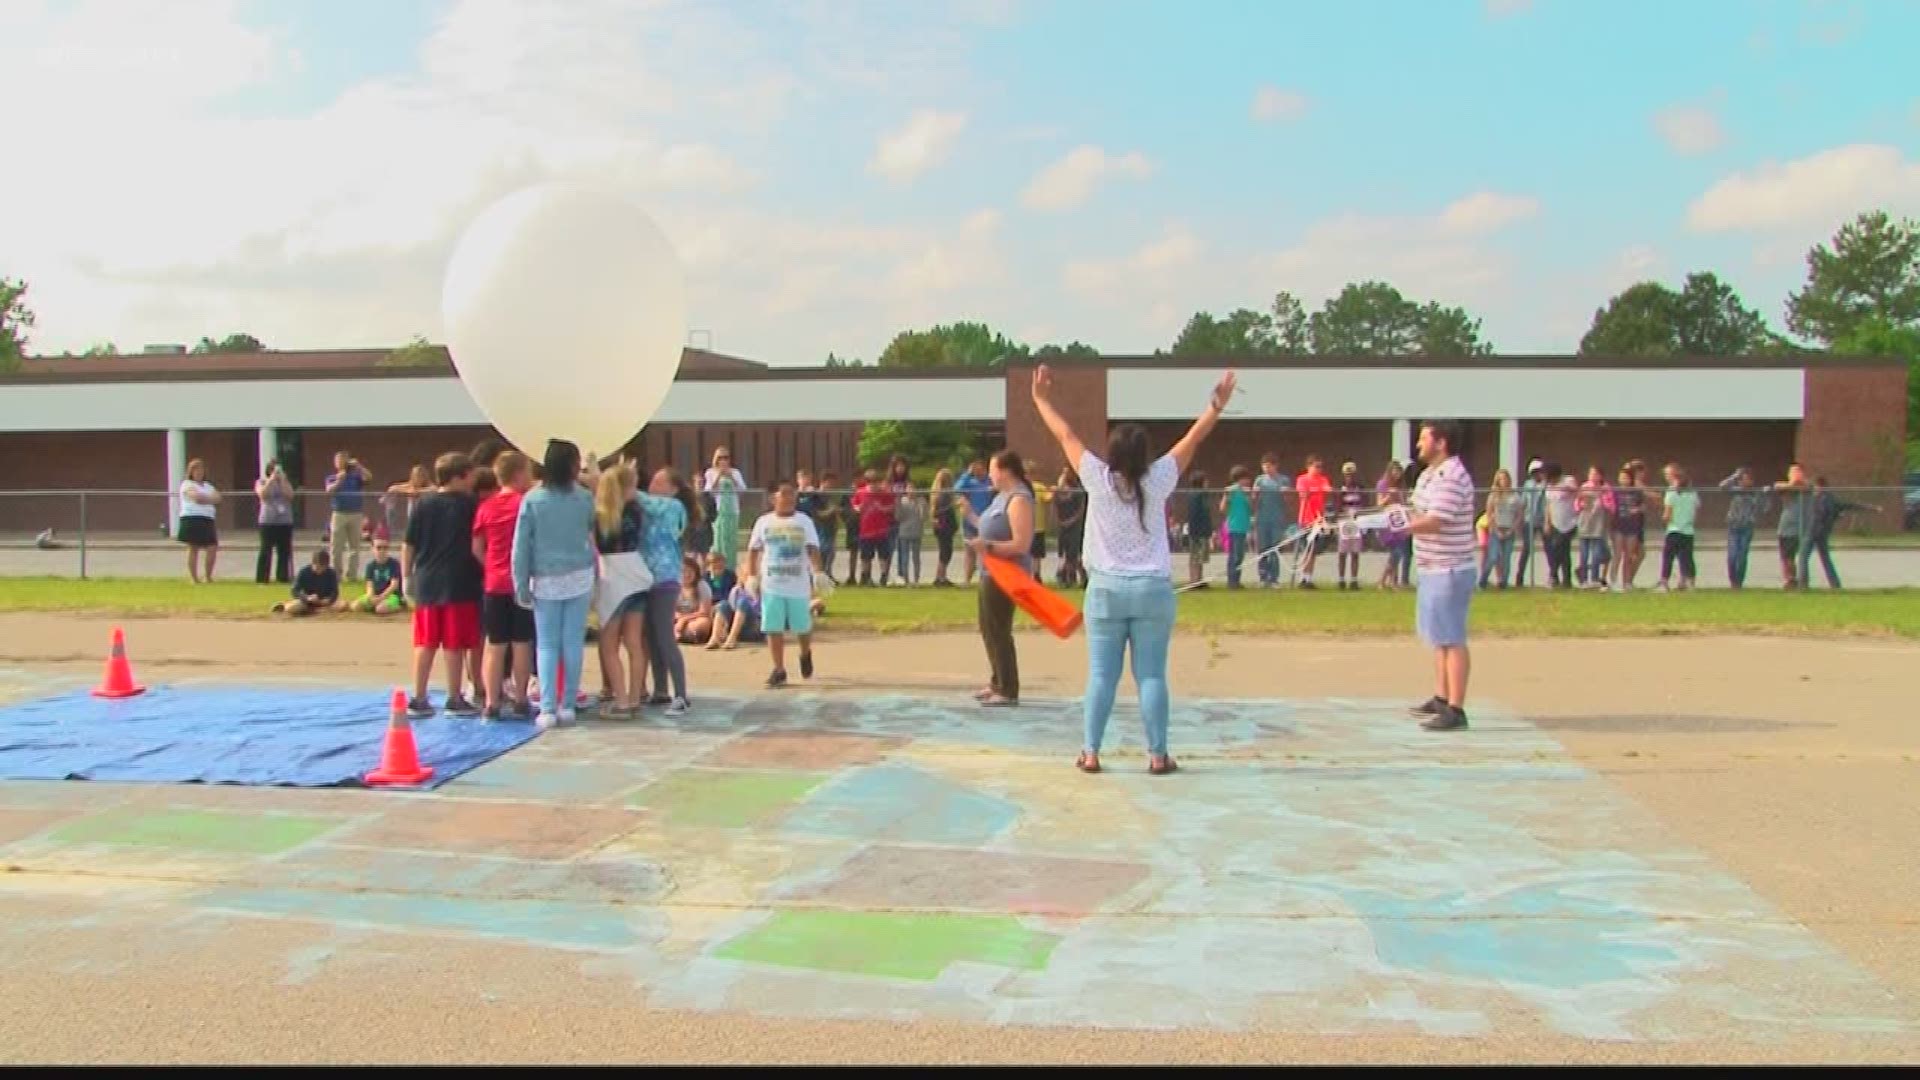 Students at White Knoll Elementary School had an uplifting science lesson.